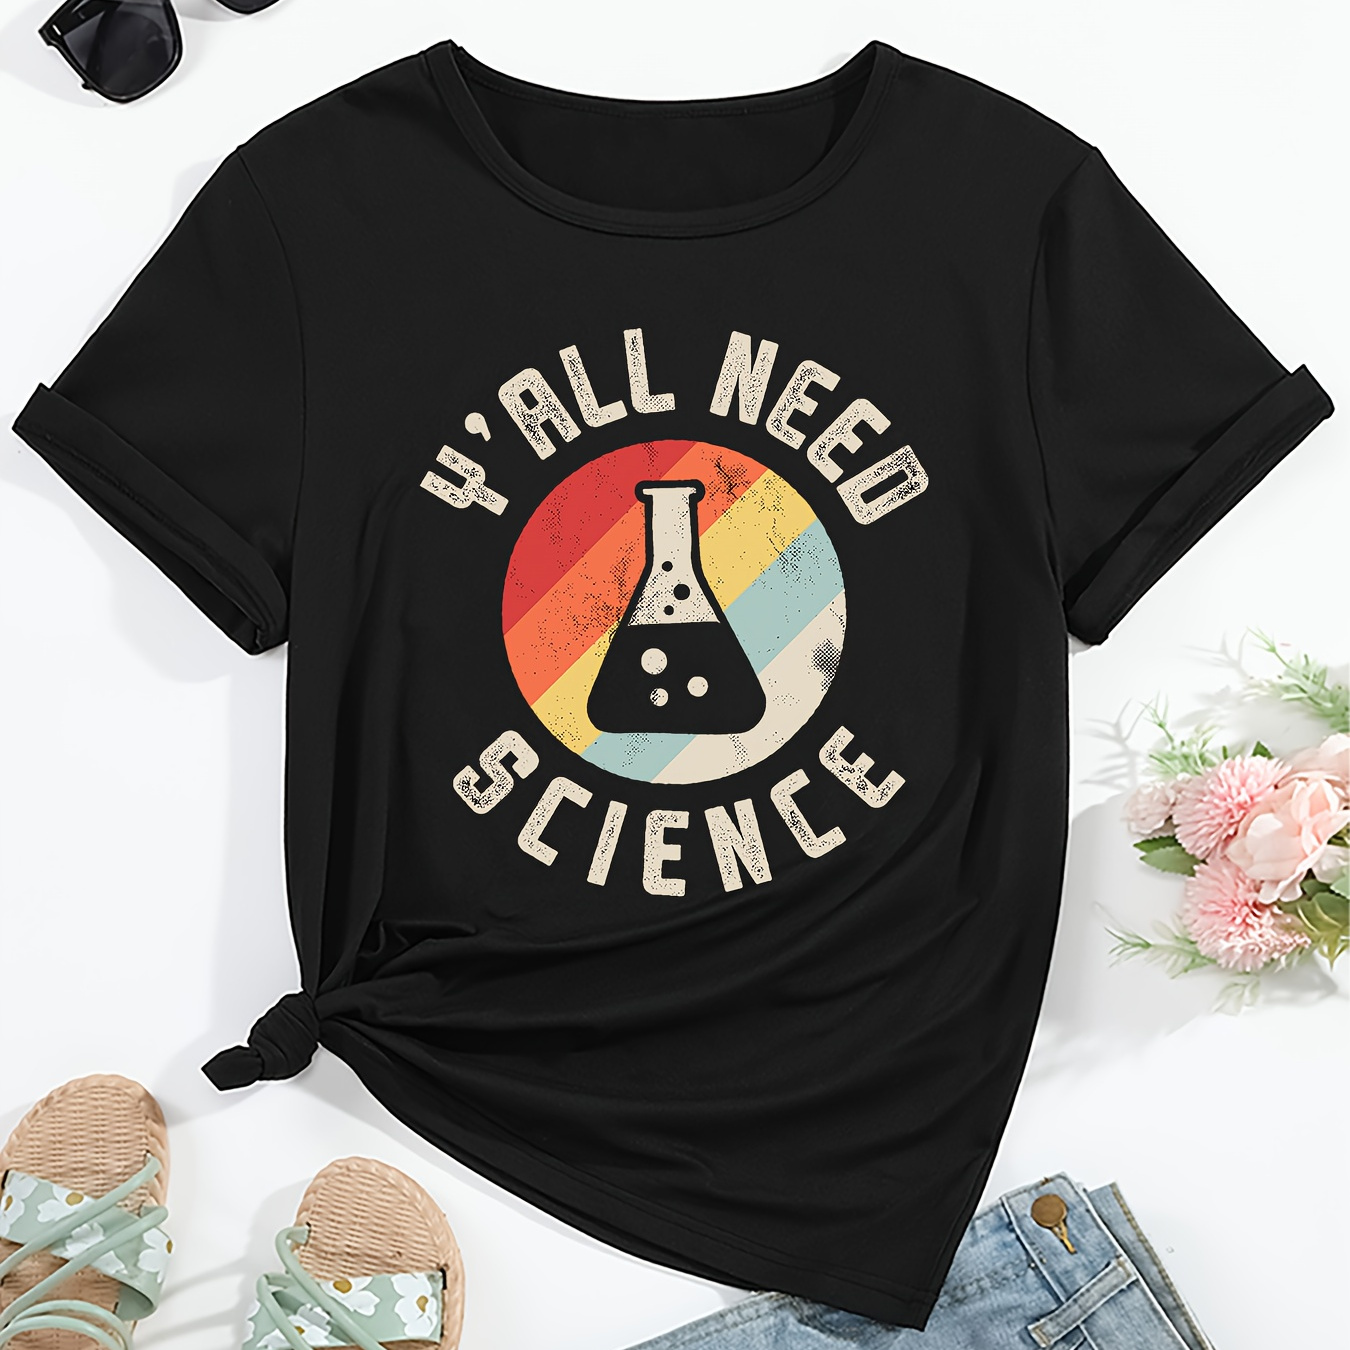 

Women's Short Sleeve Tee With "" Print, Novelty Casual Round Neck T-shirt, Soft And Comfortable Top With Lab Conical Graphic, Everyday Wear